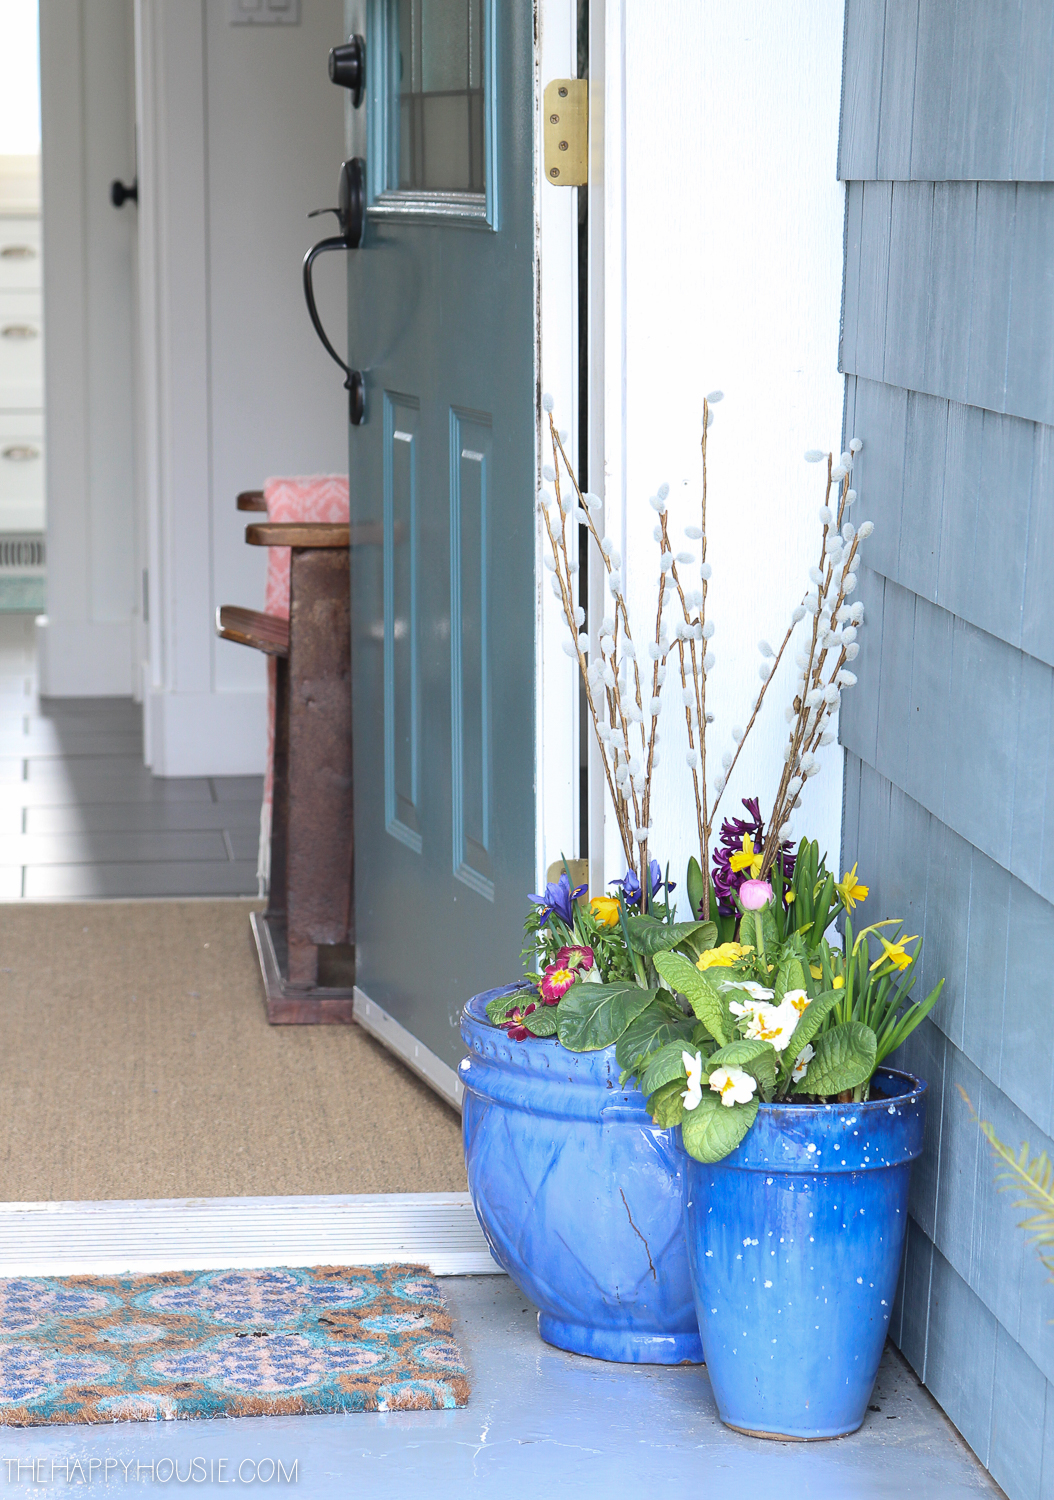 Two blue planters by the front door.